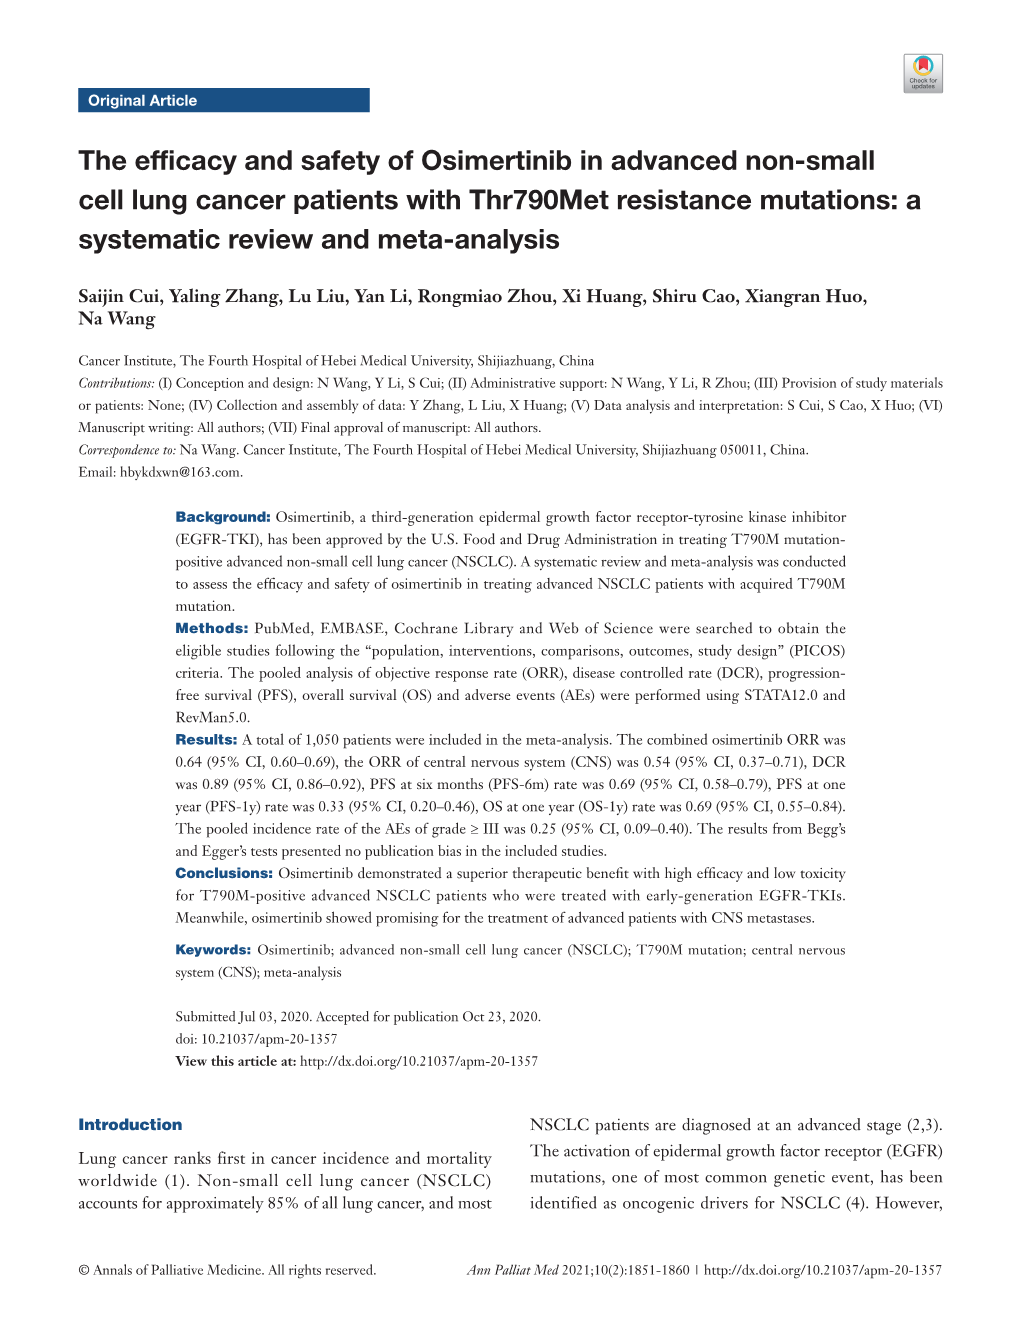 The Efficacy and Safety of Osimertinib in Advanced Non-Small Cell Lung Cancer Patients with Thr790met Resistance Mutations: a Systematic Review and Meta-Analysis